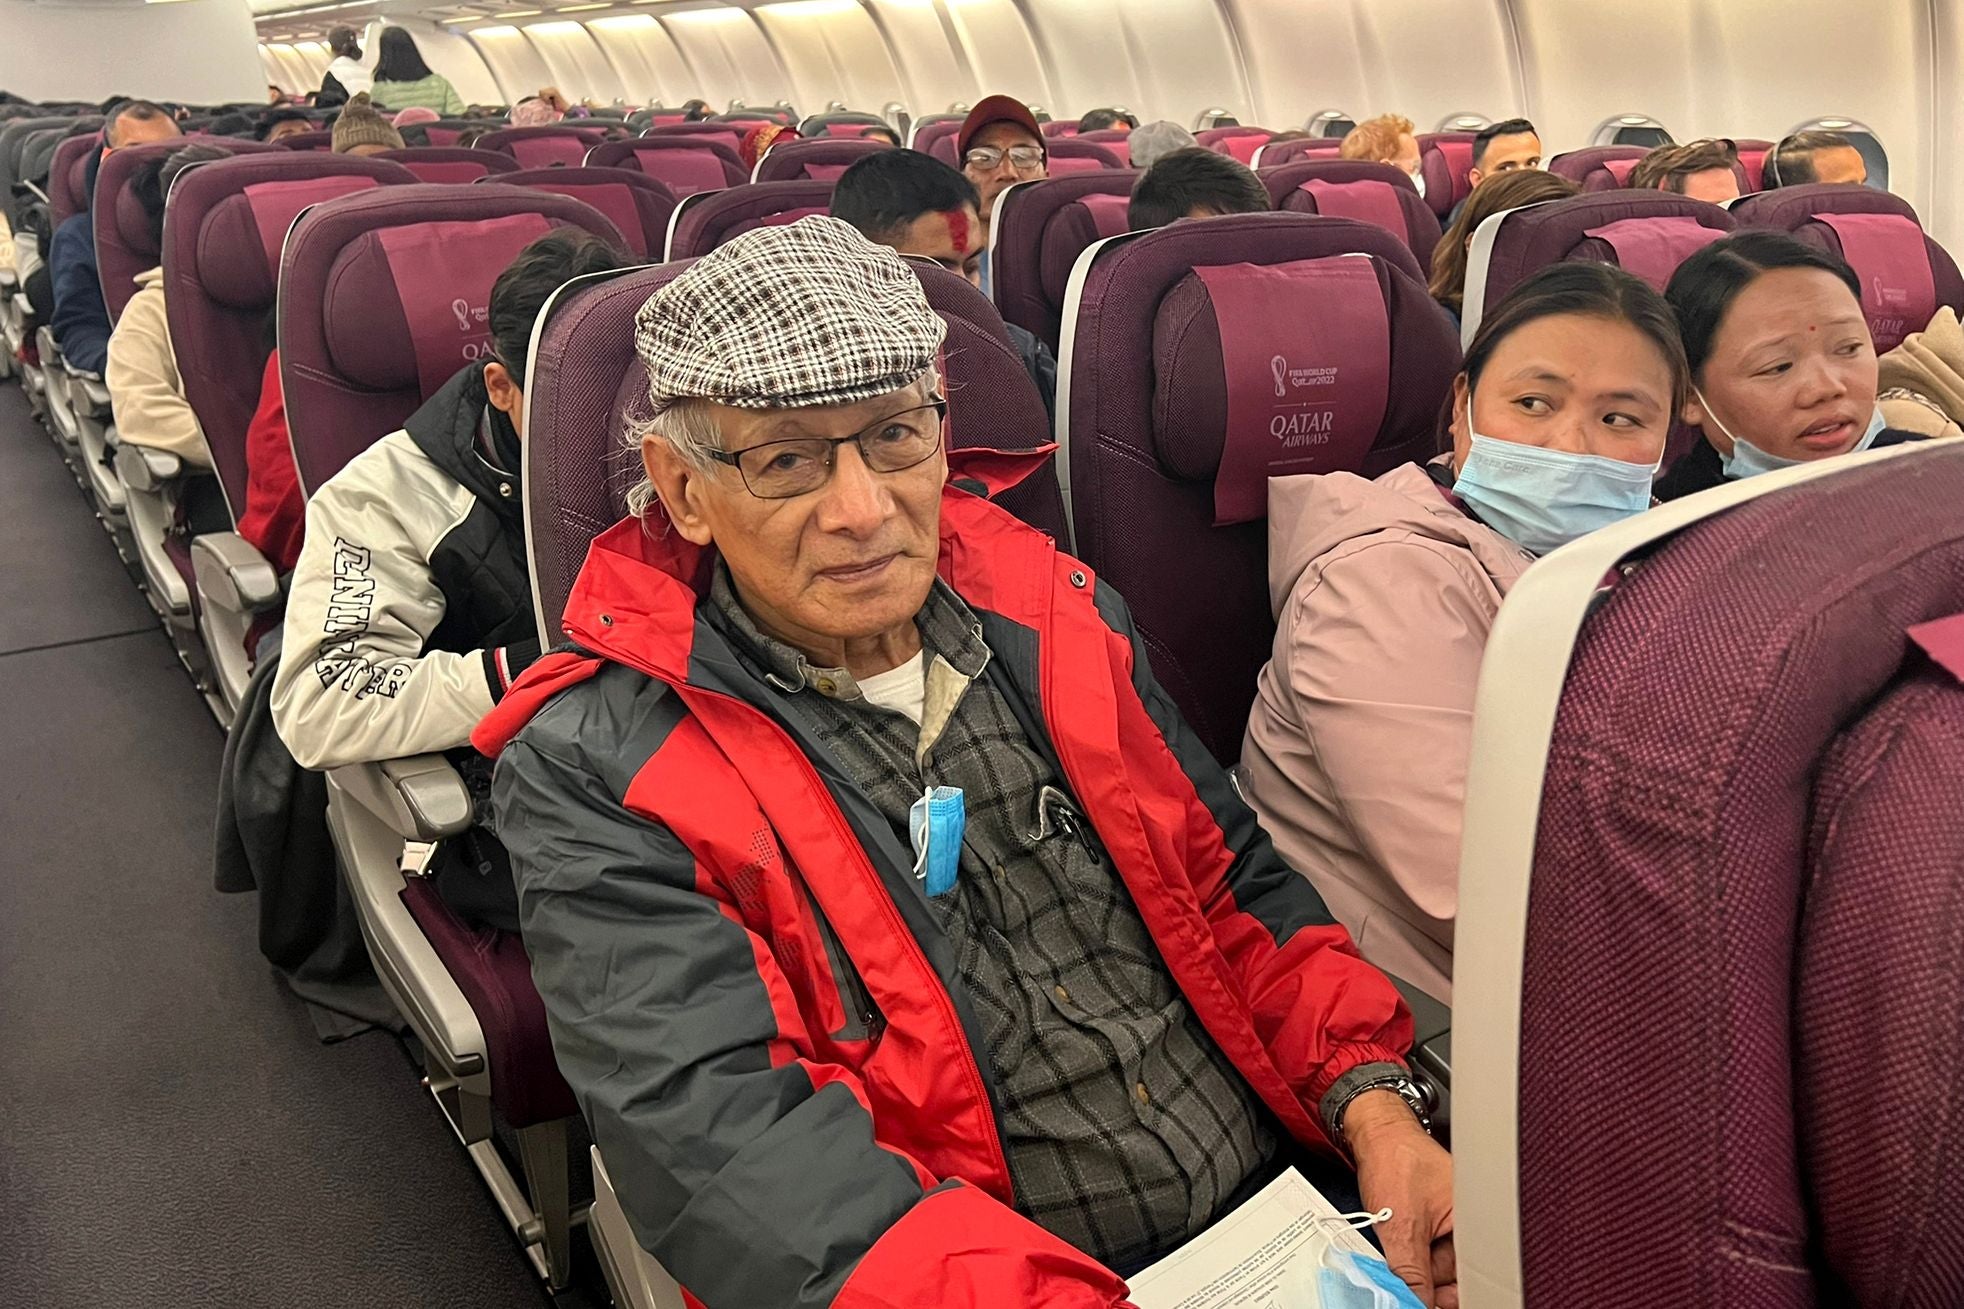 French serial killer Charles Sobhraj sits in an aircraft from Kathmandu to France on 23 December